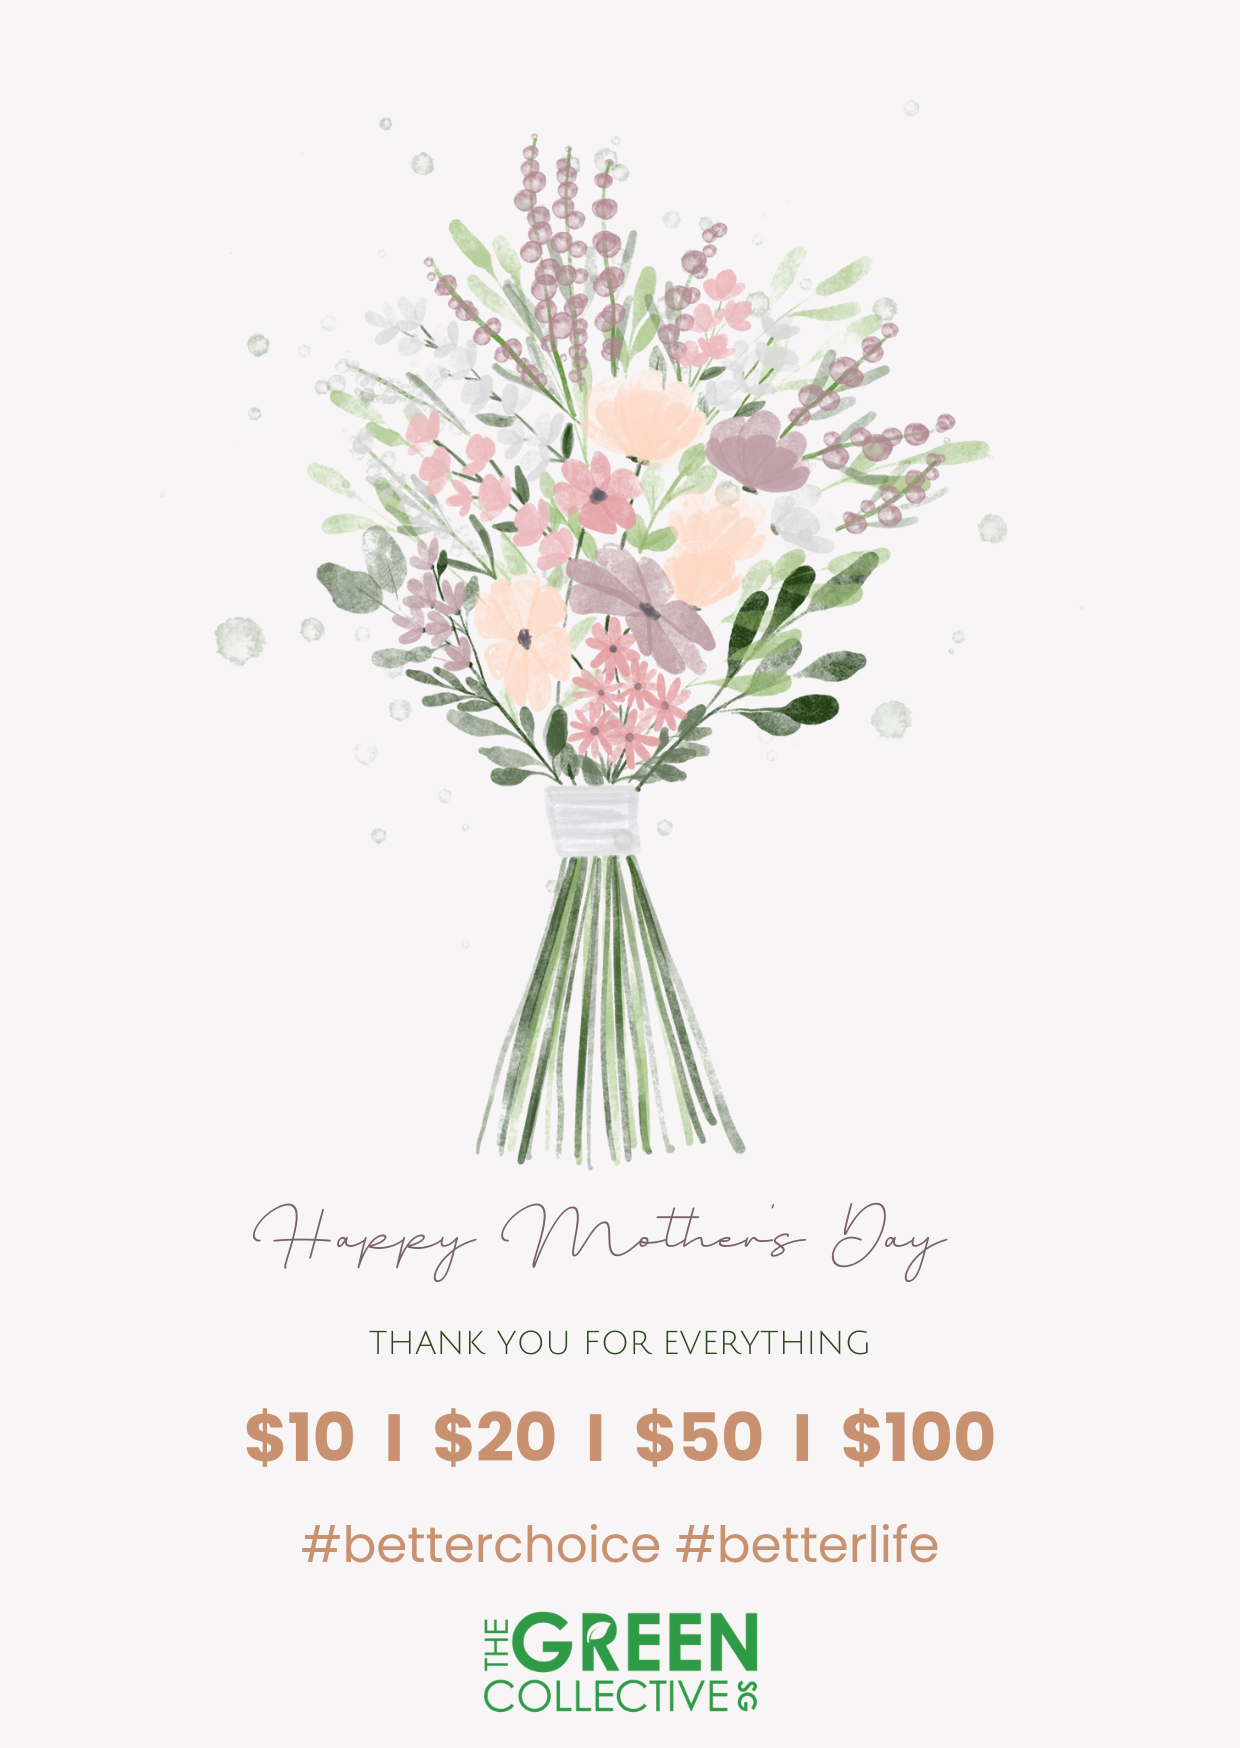 Mothers Day Gift Card | Gifting | The Green Collective SG